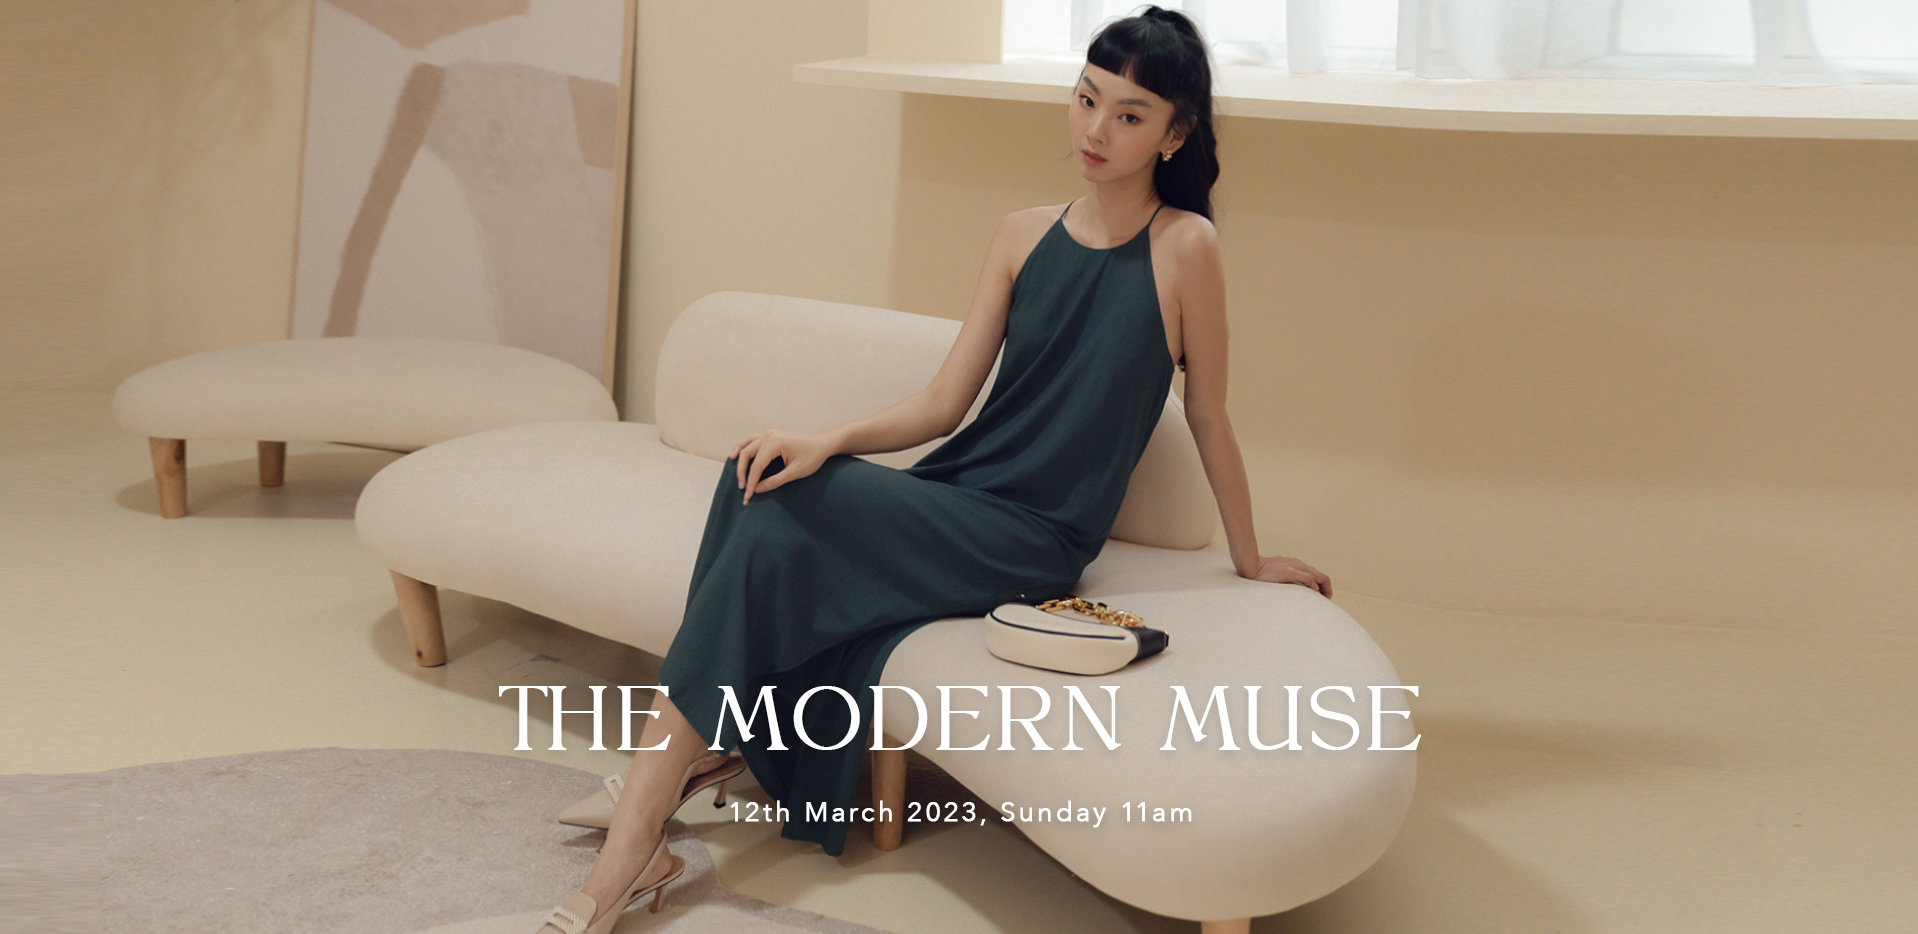 THE MODERN MUSE